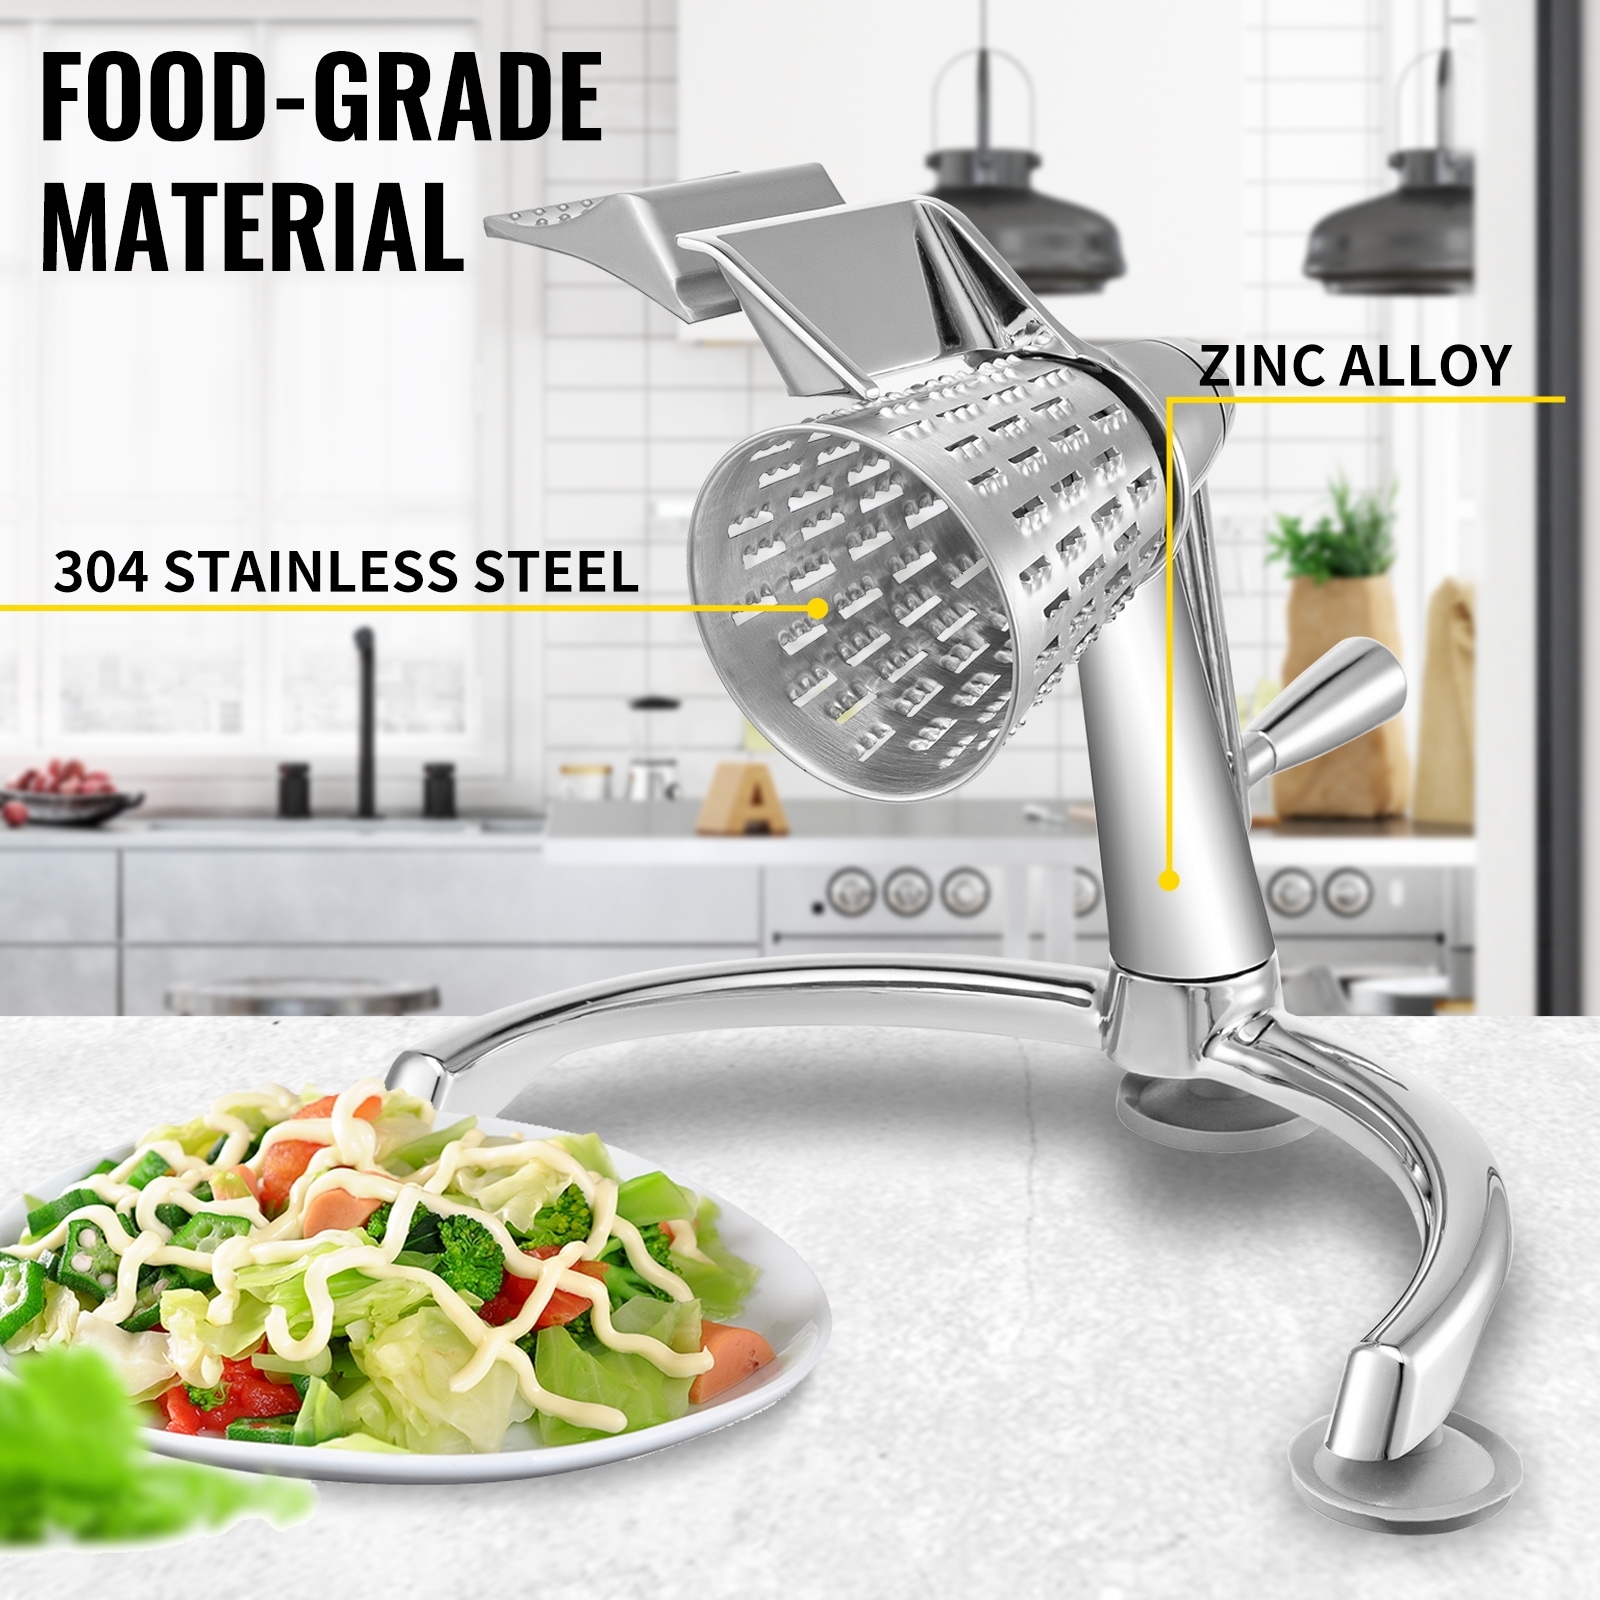 https://ak1.ostkcdn.com/images/products/is/images/direct/2109babda920a4618fbf333b8e6734ff7fea28e9/VEVOR-Rotary-Cheese-Grater-Zinc-Alloy-Rotary-Vegetable-Mandoline-Manual-Cheese-Mandoline-w--5-Stainless-Steel-Cutting-Cones.jpg